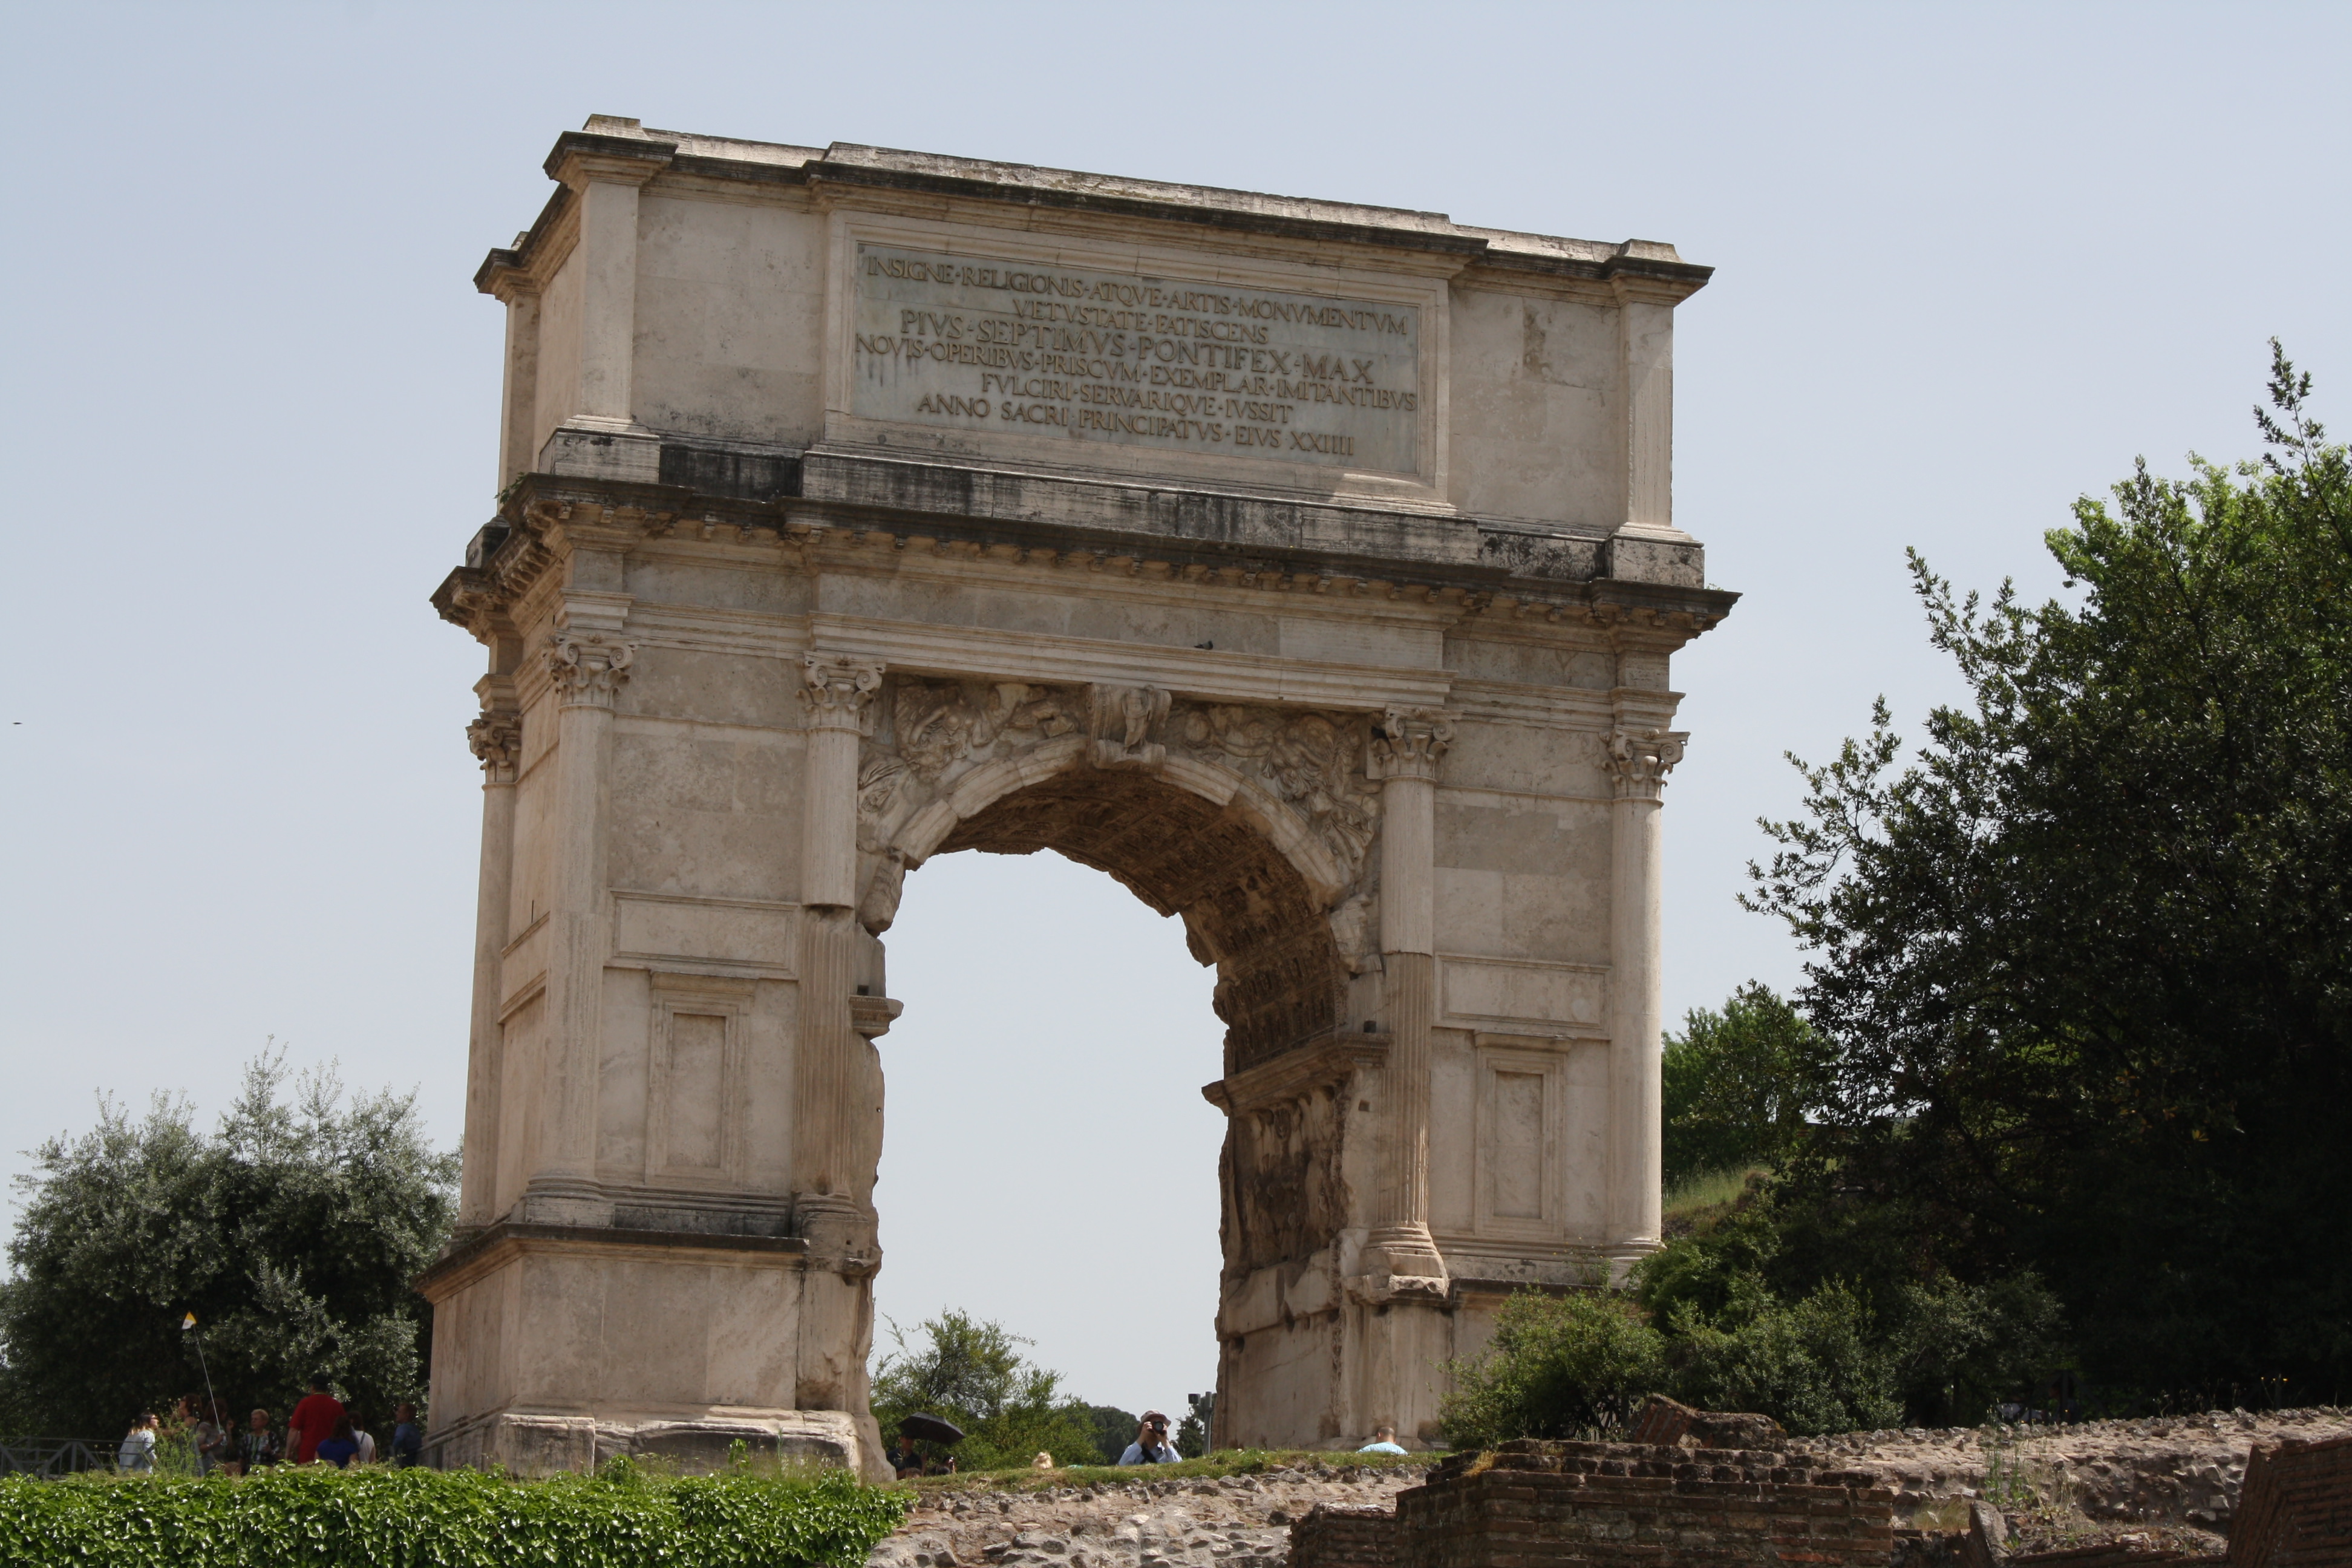 The Arch of Titus, Rome (Article) - Ancient History Encyclopedia